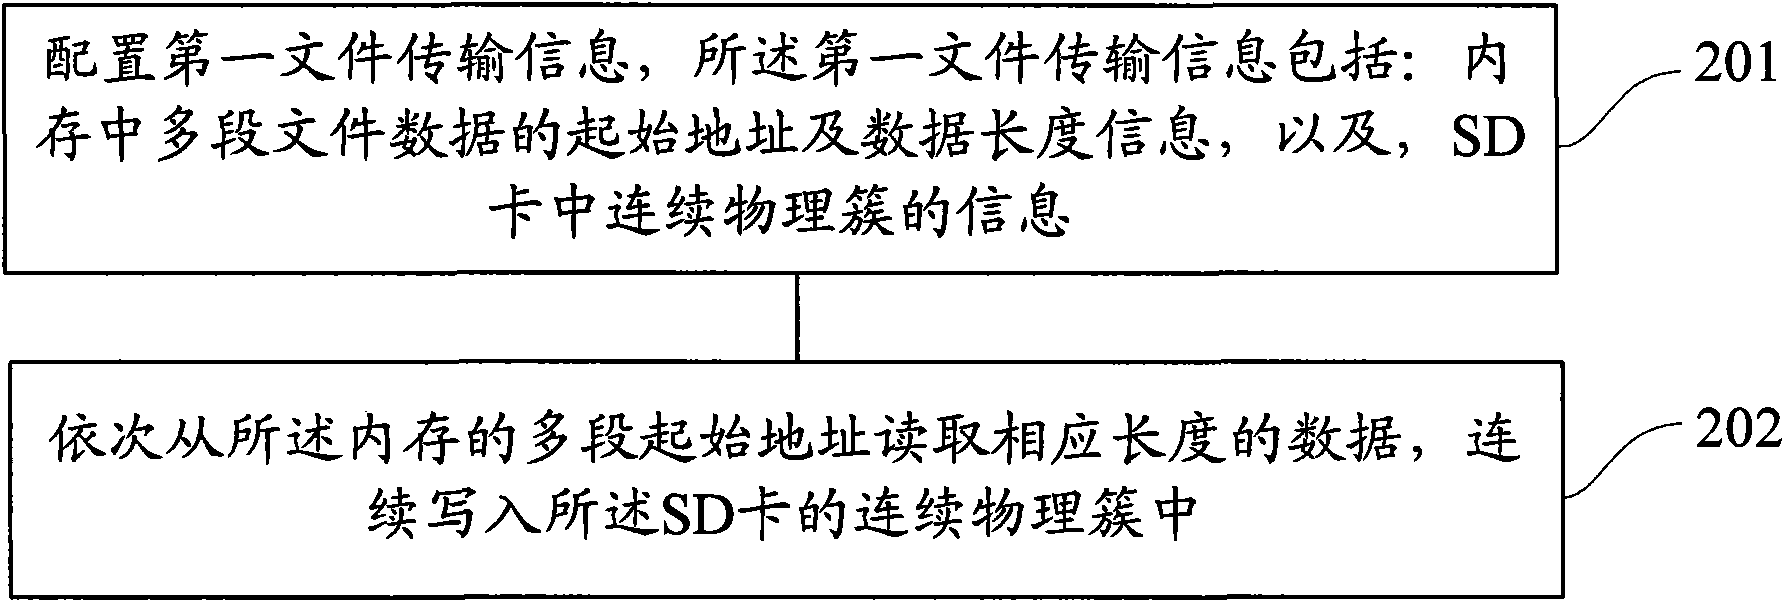 File access method and device of SD (Secure Digital) card